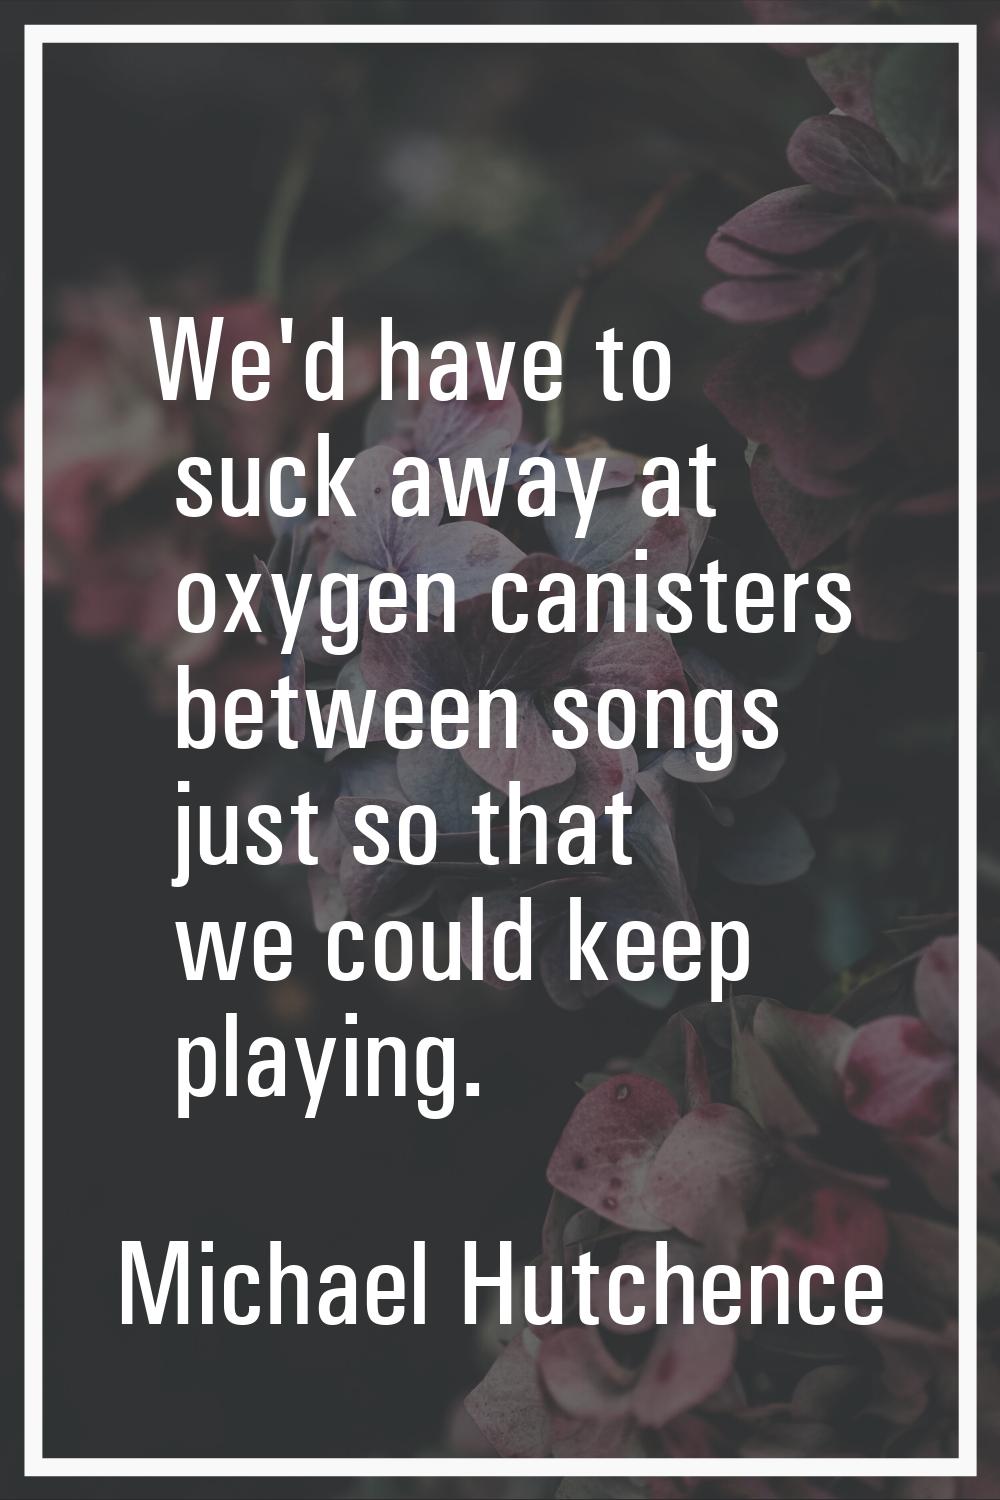 We'd have to suck away at oxygen canisters between songs just so that we could keep playing.